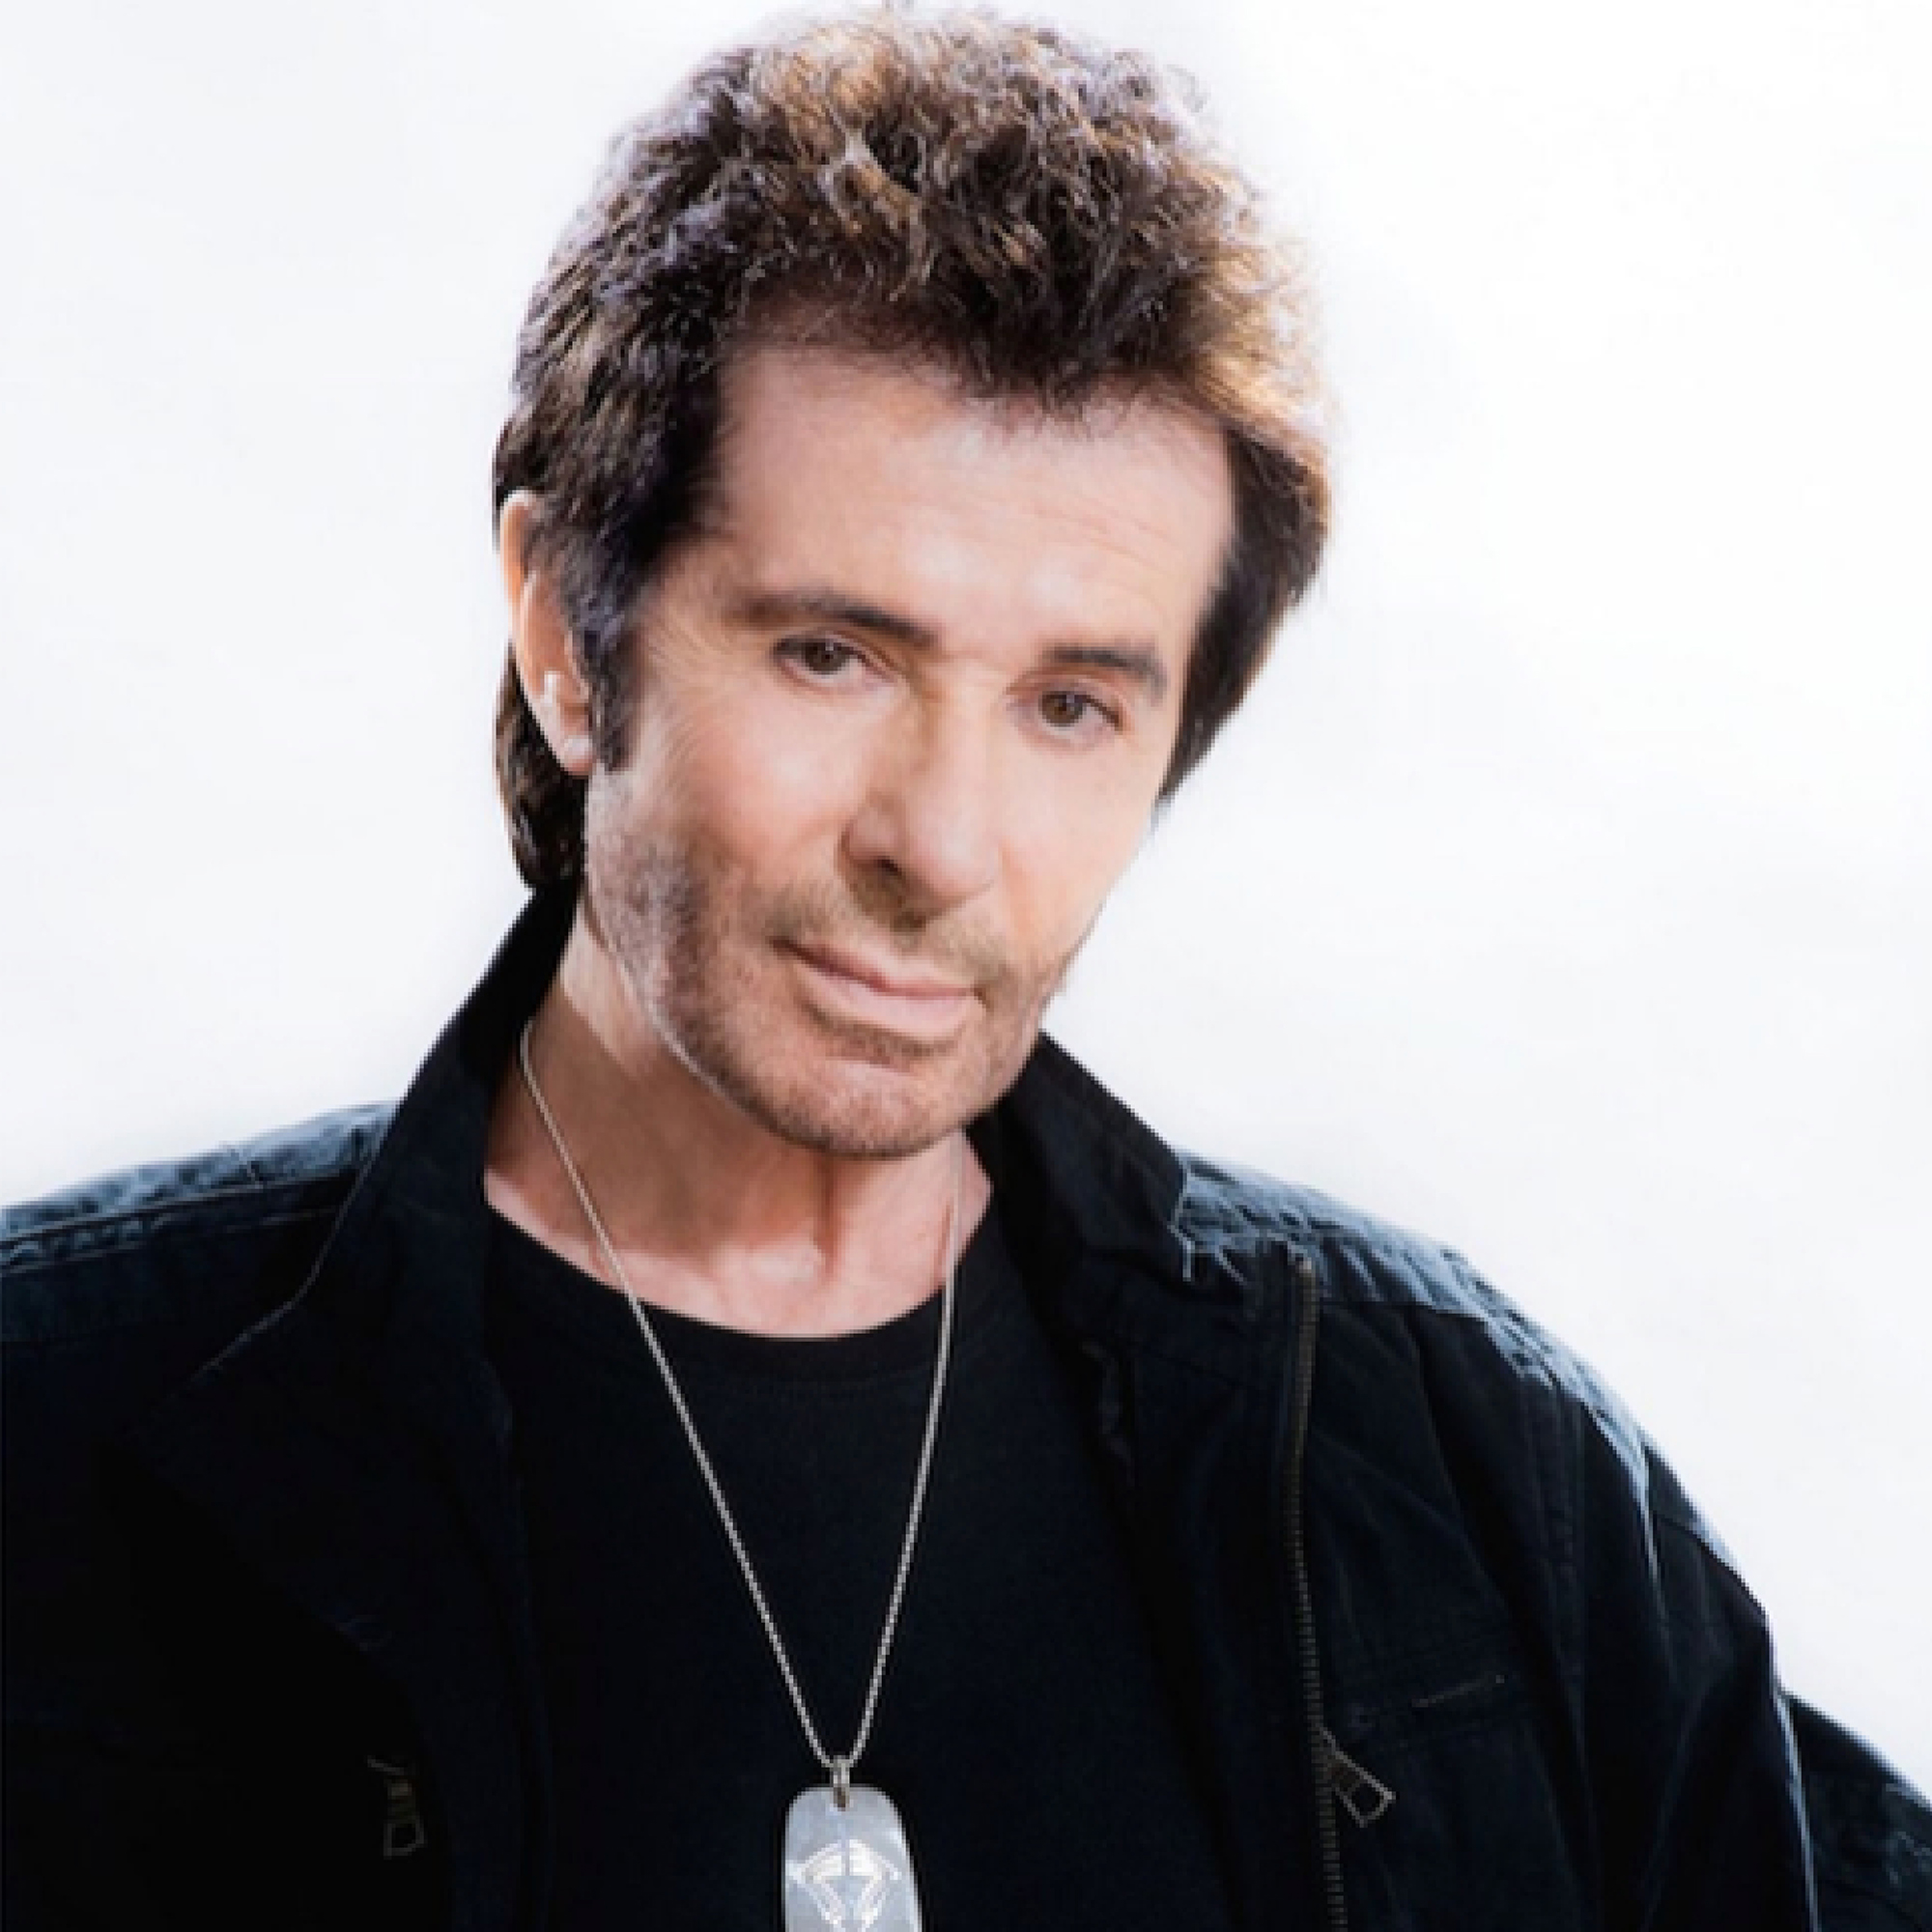 current (2023) headshot of actor George Chakiris in promotion of his appearance on the 2023 TCM Classic Cruise